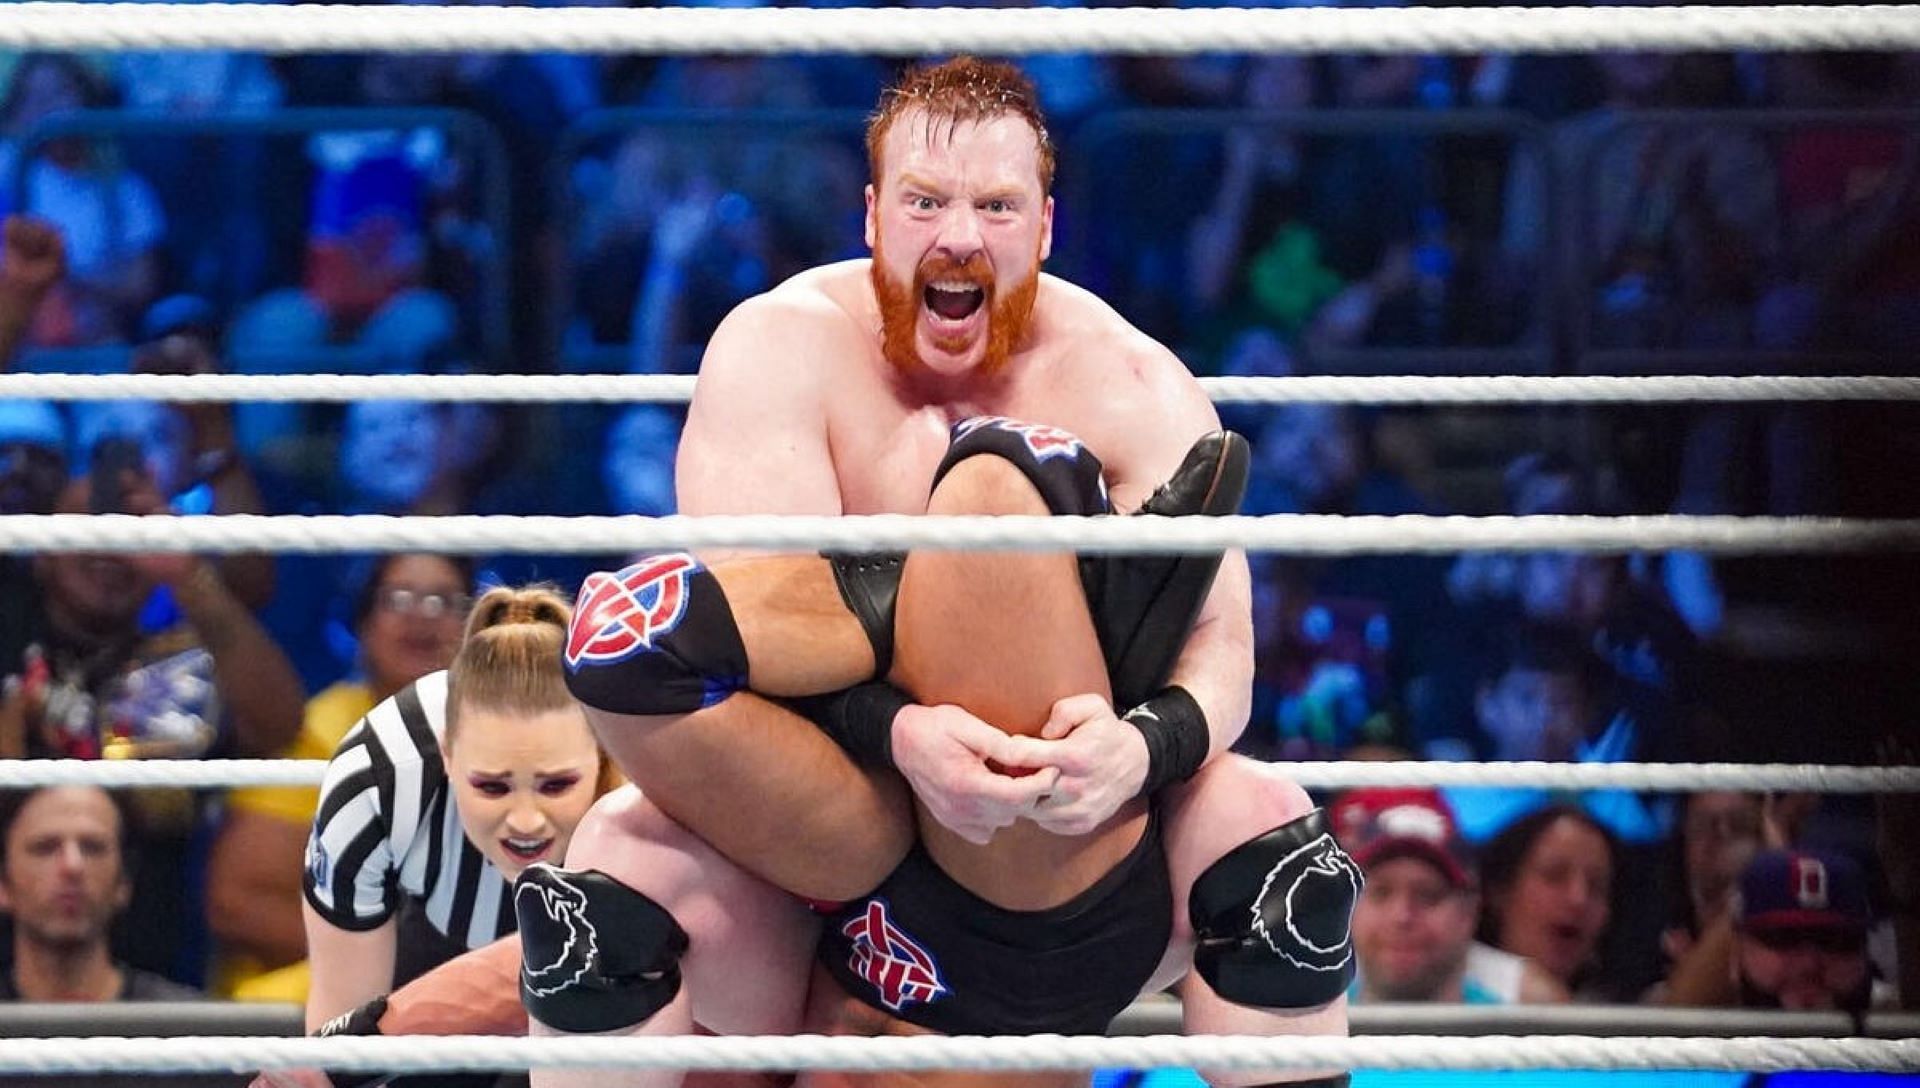 Sheamus battled Austin Theory for the US Championship last summer.